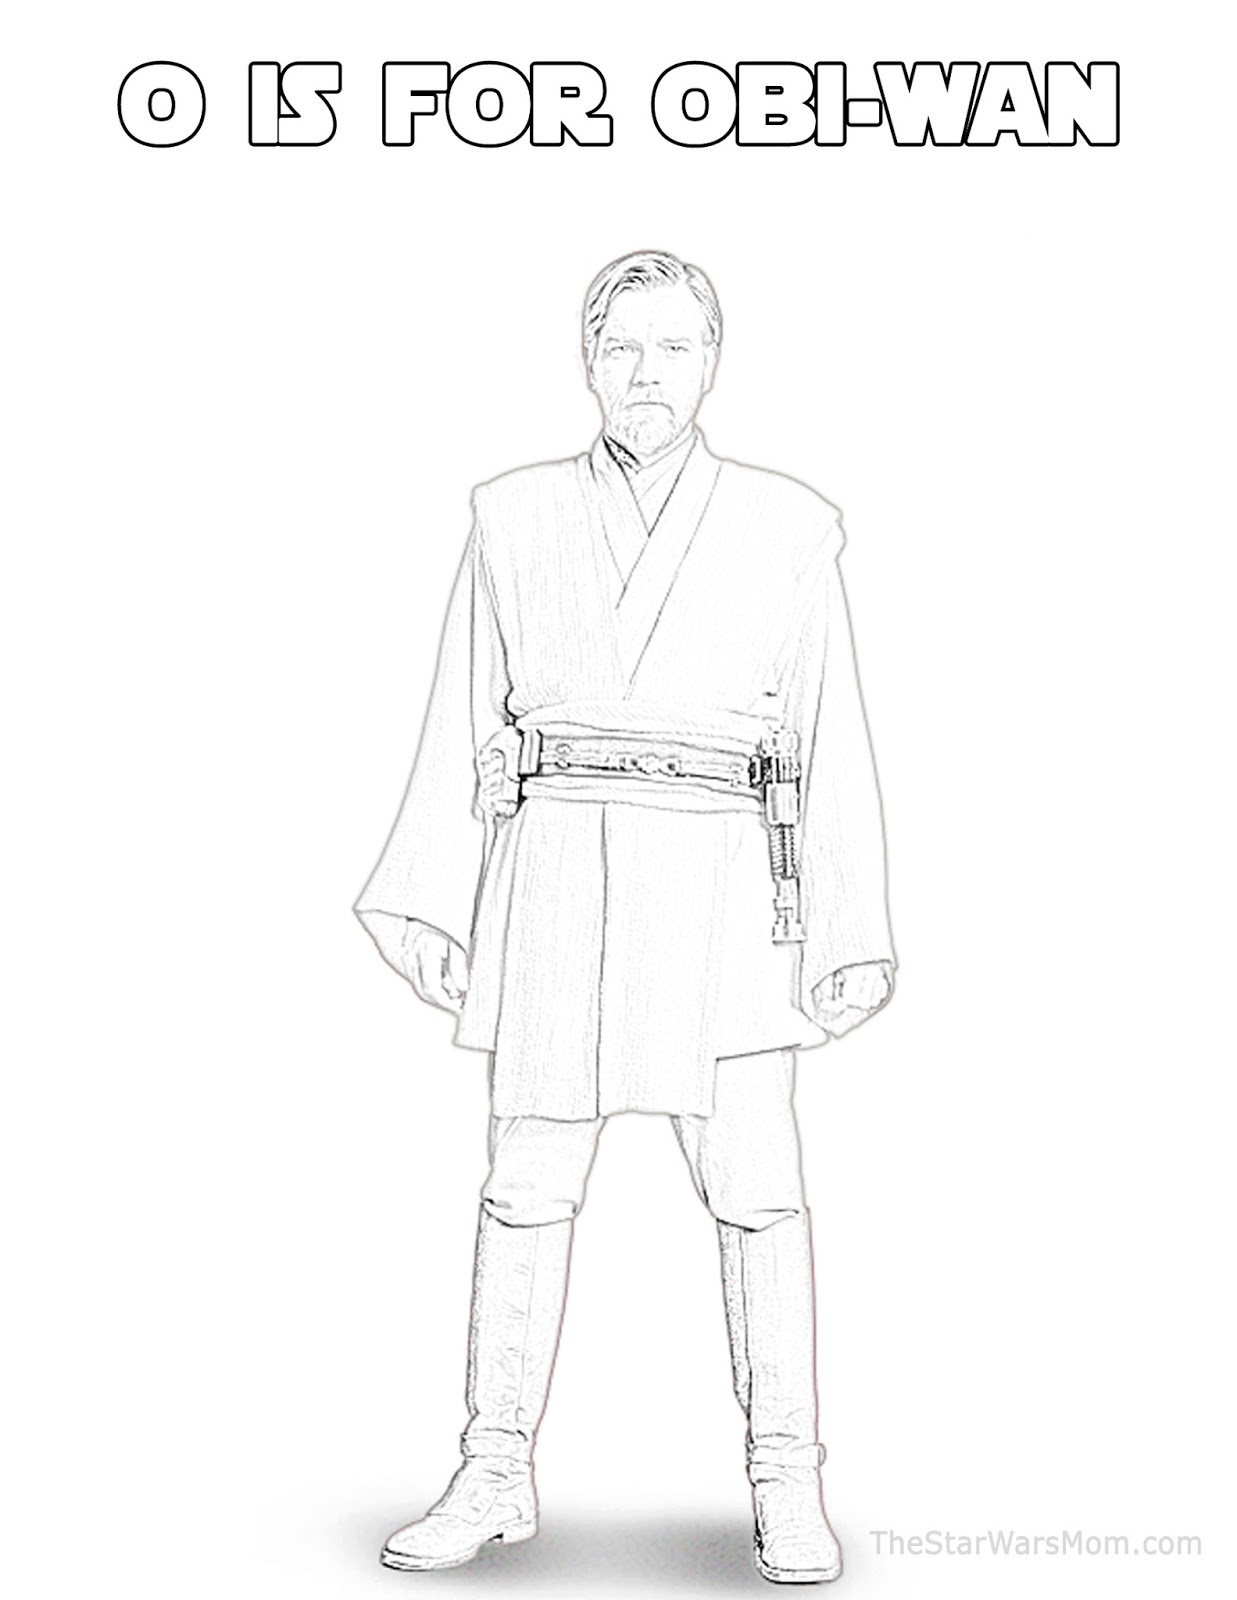 Download O is for Obi-Wan Kenobi - Star Wars Alphabet Coloring Page - The Star Wars Mom - Parties ...